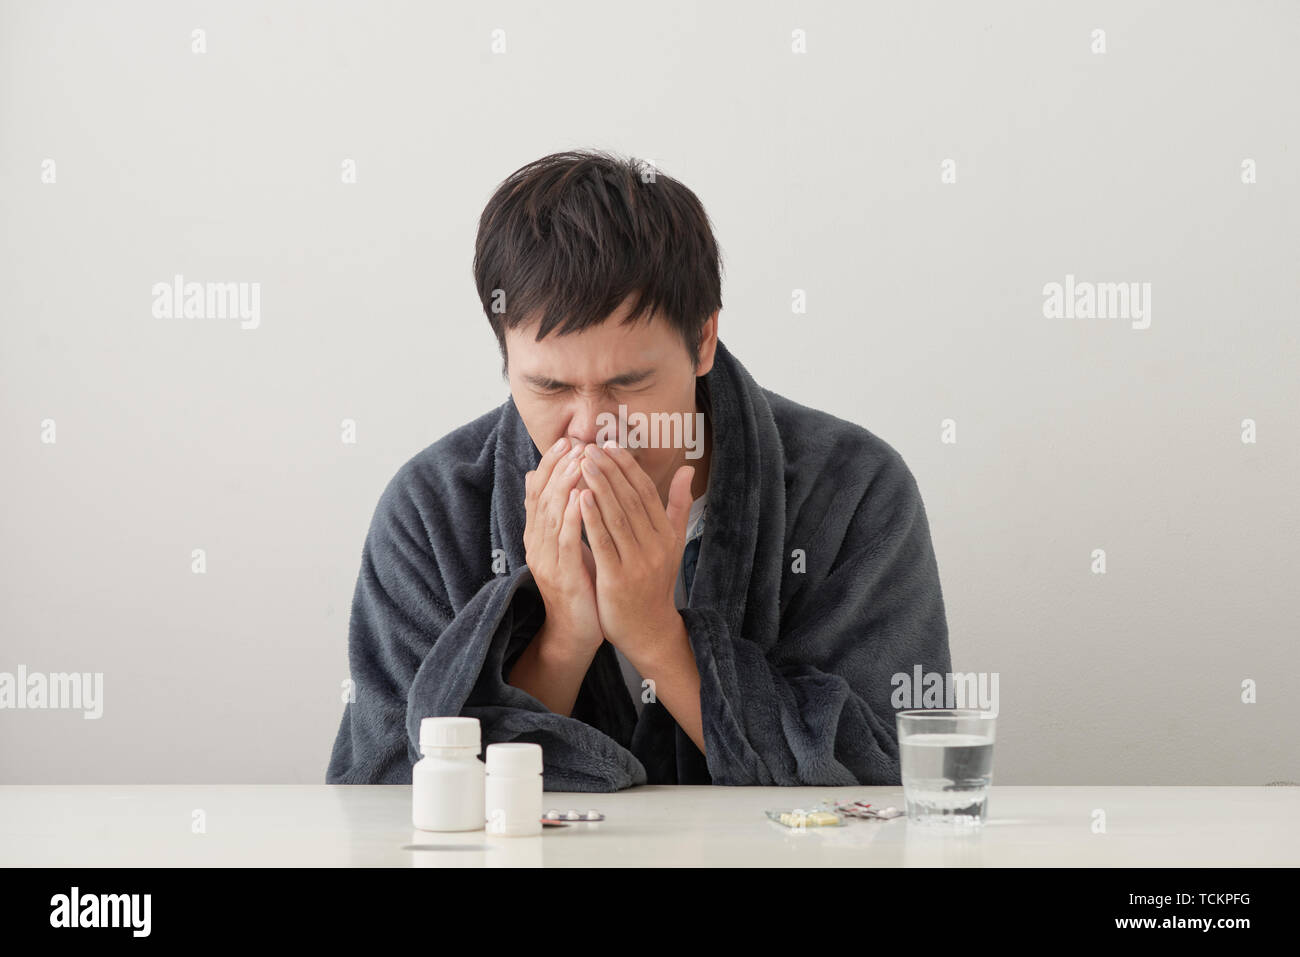 young sick and ill man in sofa holding tissue cleaning snotty nose having temperature feeling bad infected by winter grippe virus in flu and influenza Stock Photo